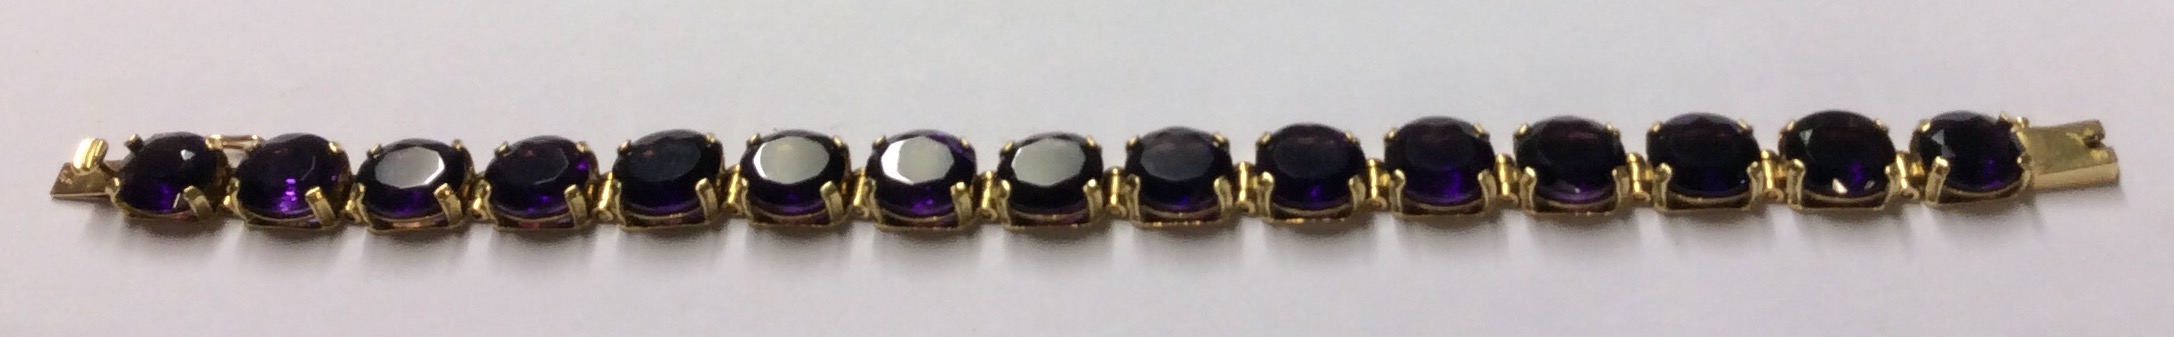 AN 18CT GOLD AND AMETHYST BRACELET Having a single row of oval cut amethysts set in articulated